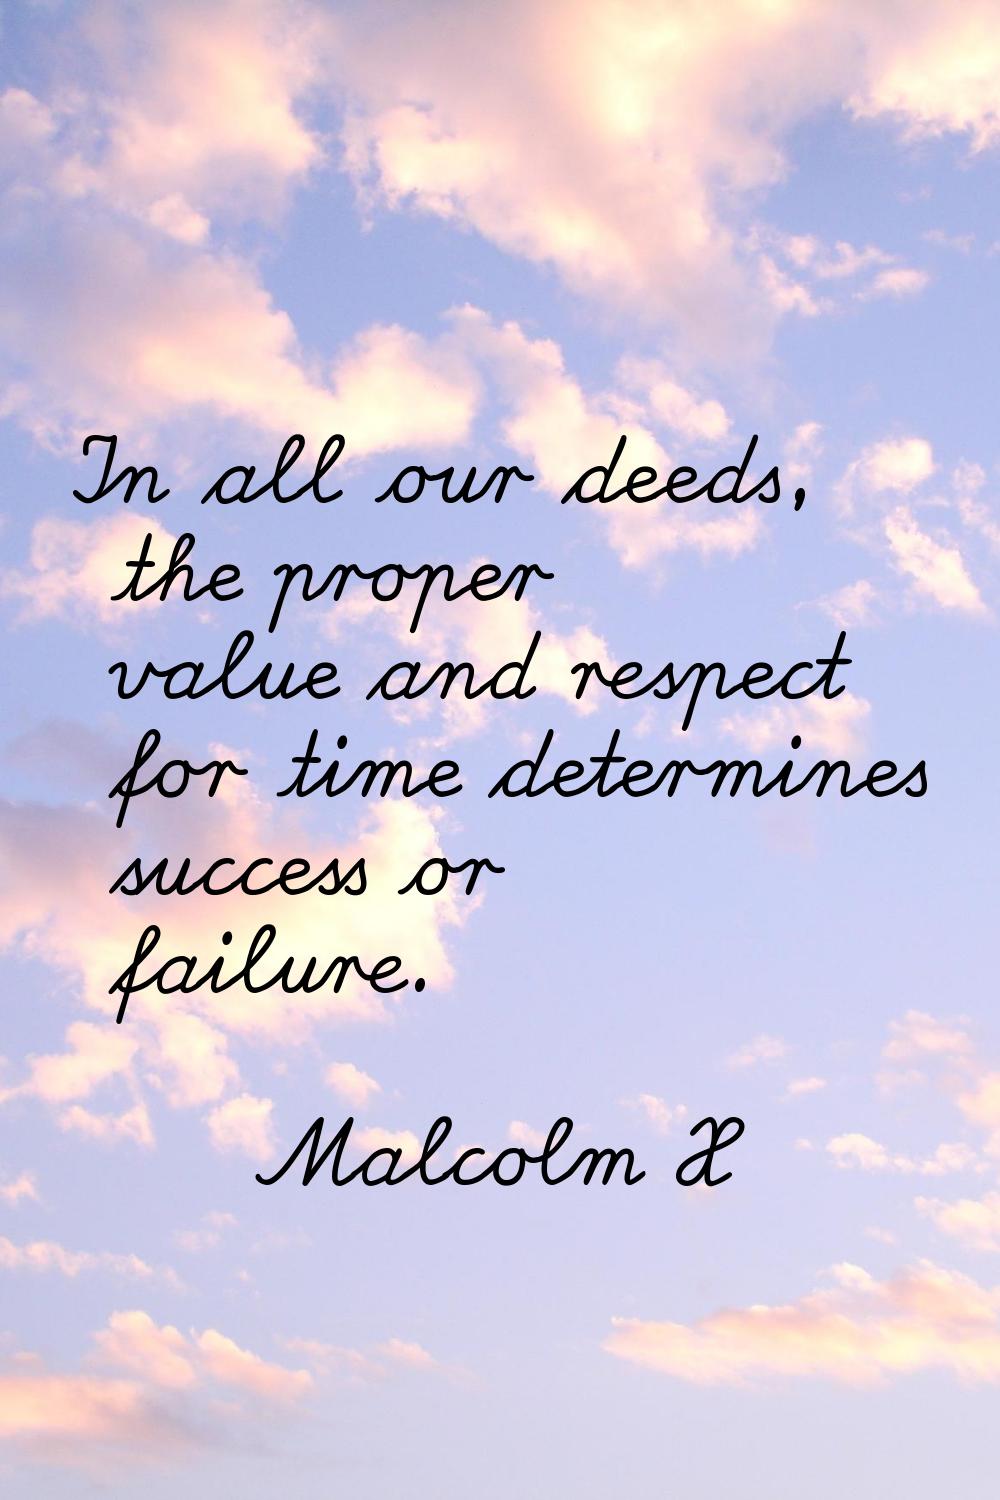 In all our deeds, the proper value and respect for time determines success or failure.